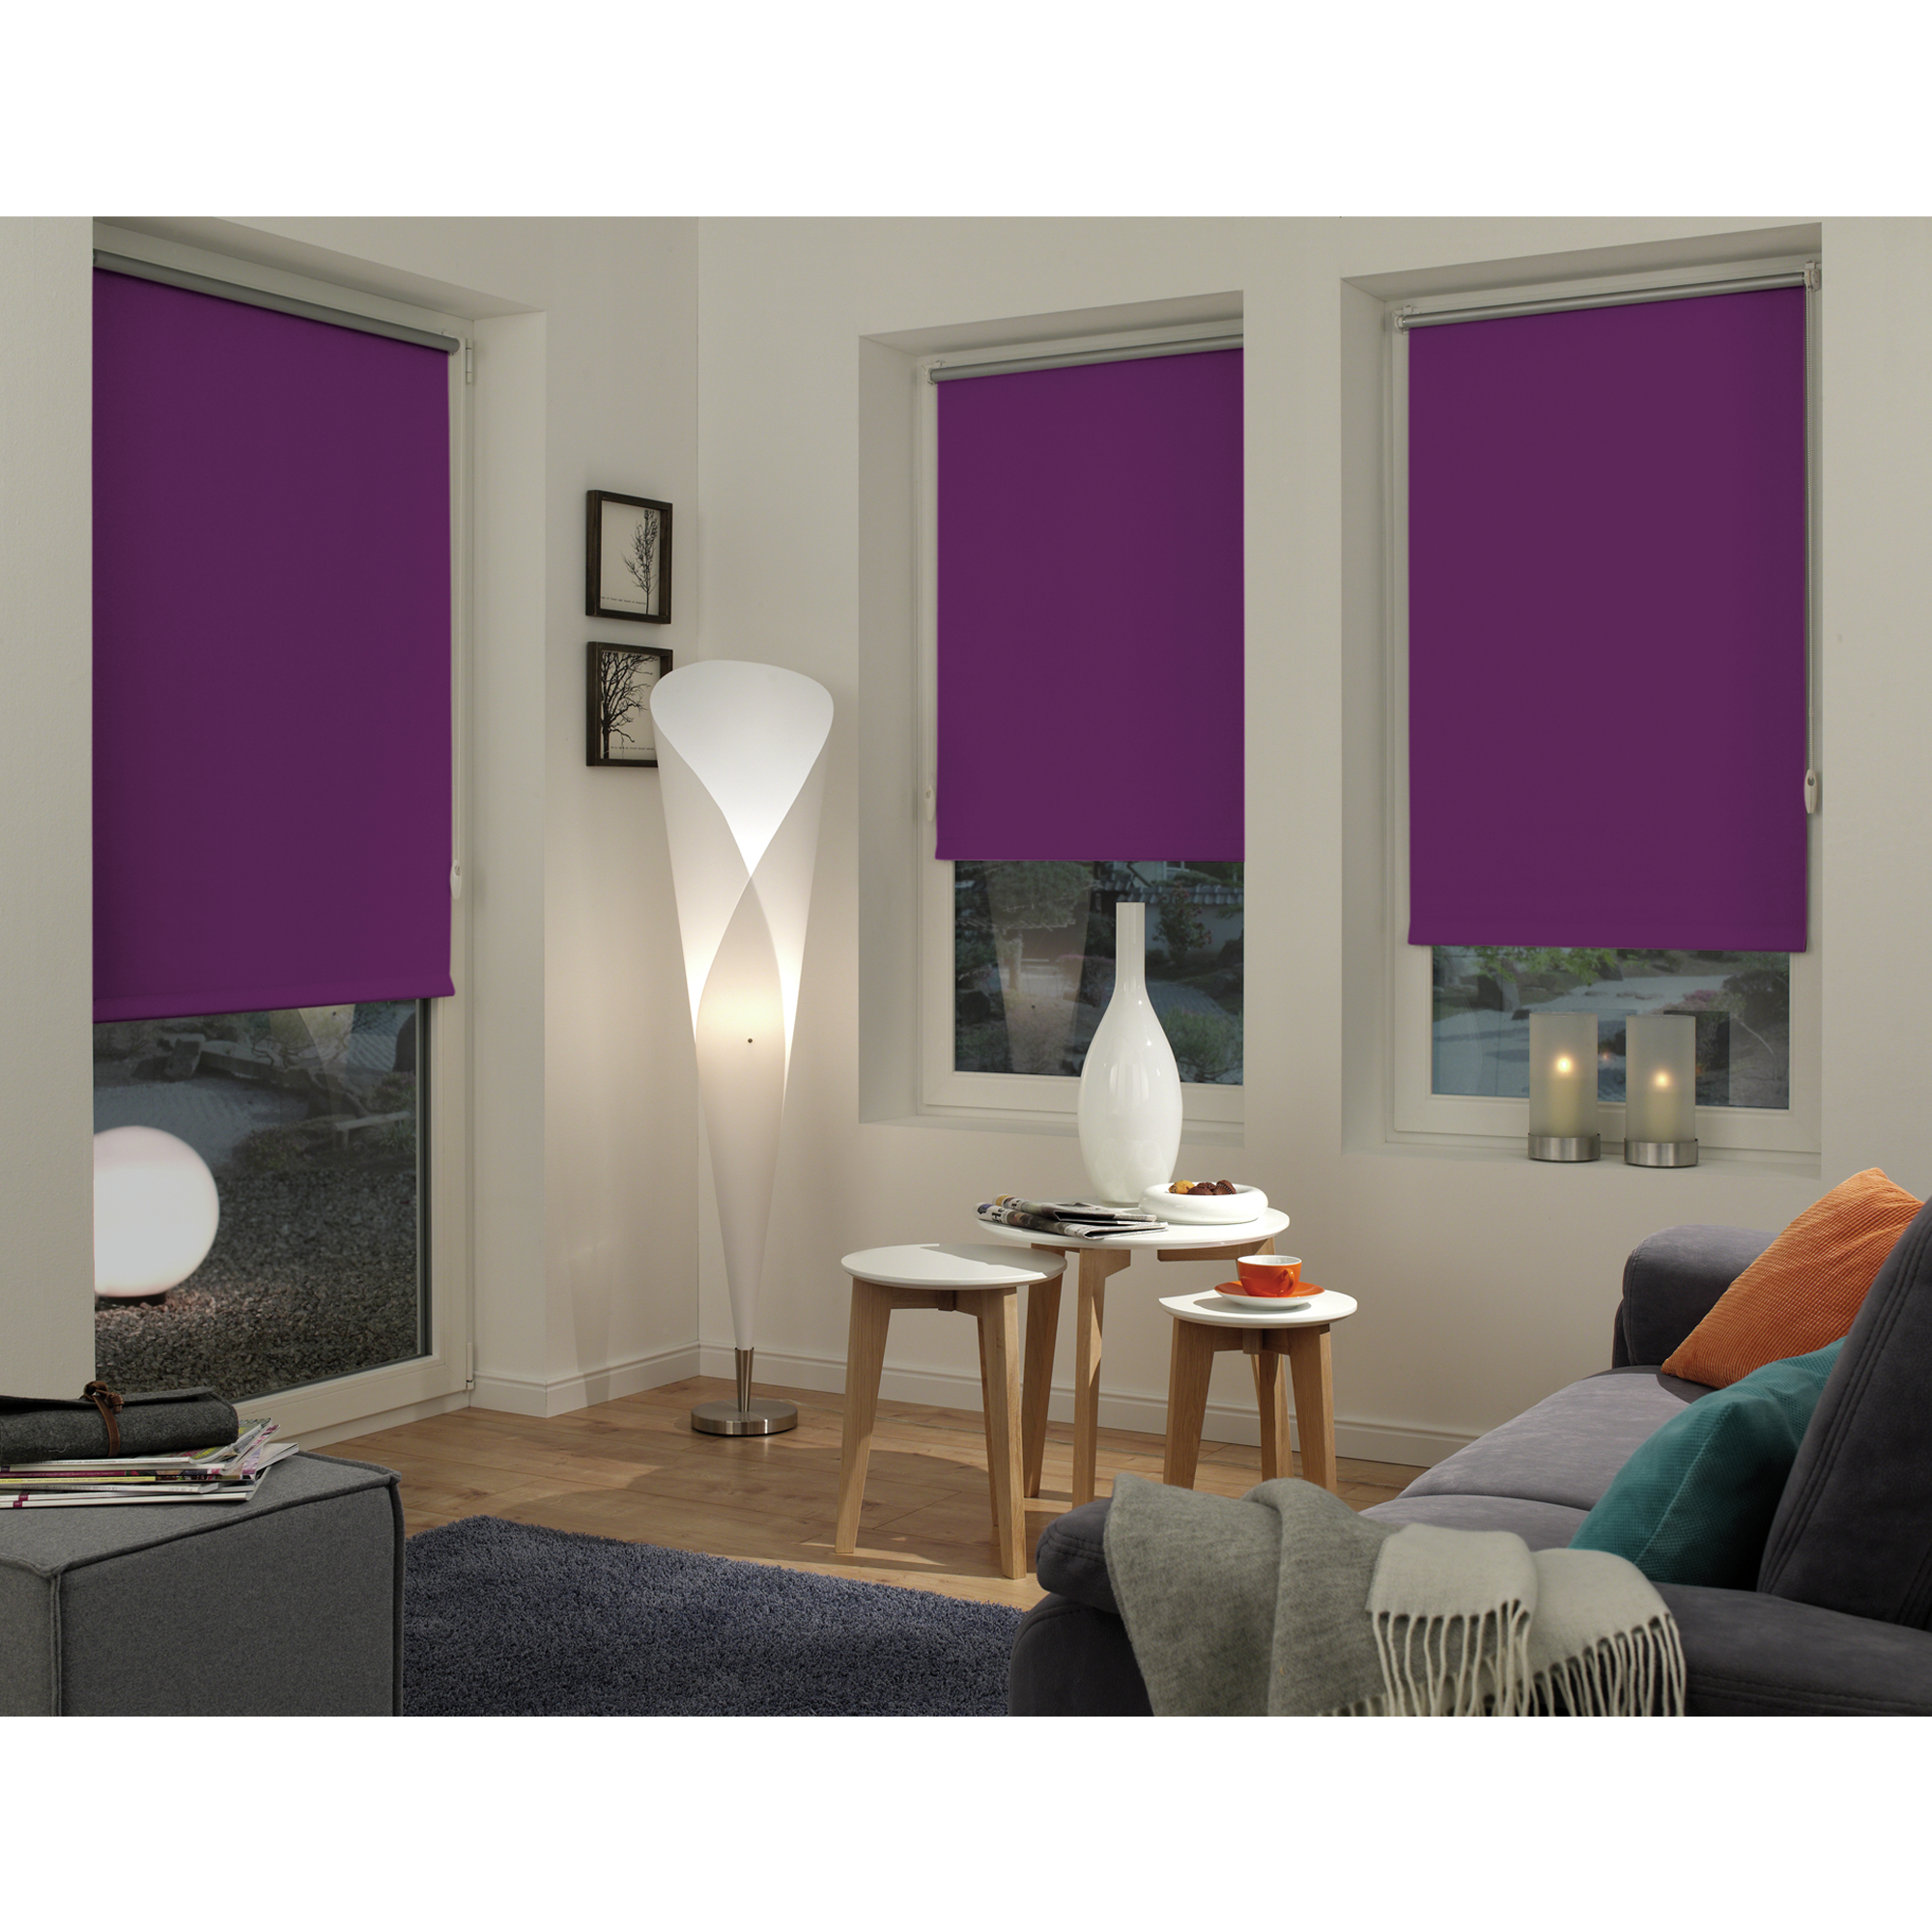 EasyFix Rollo 'Thermo energiesparend' lila 75 x 150 cm + product picture